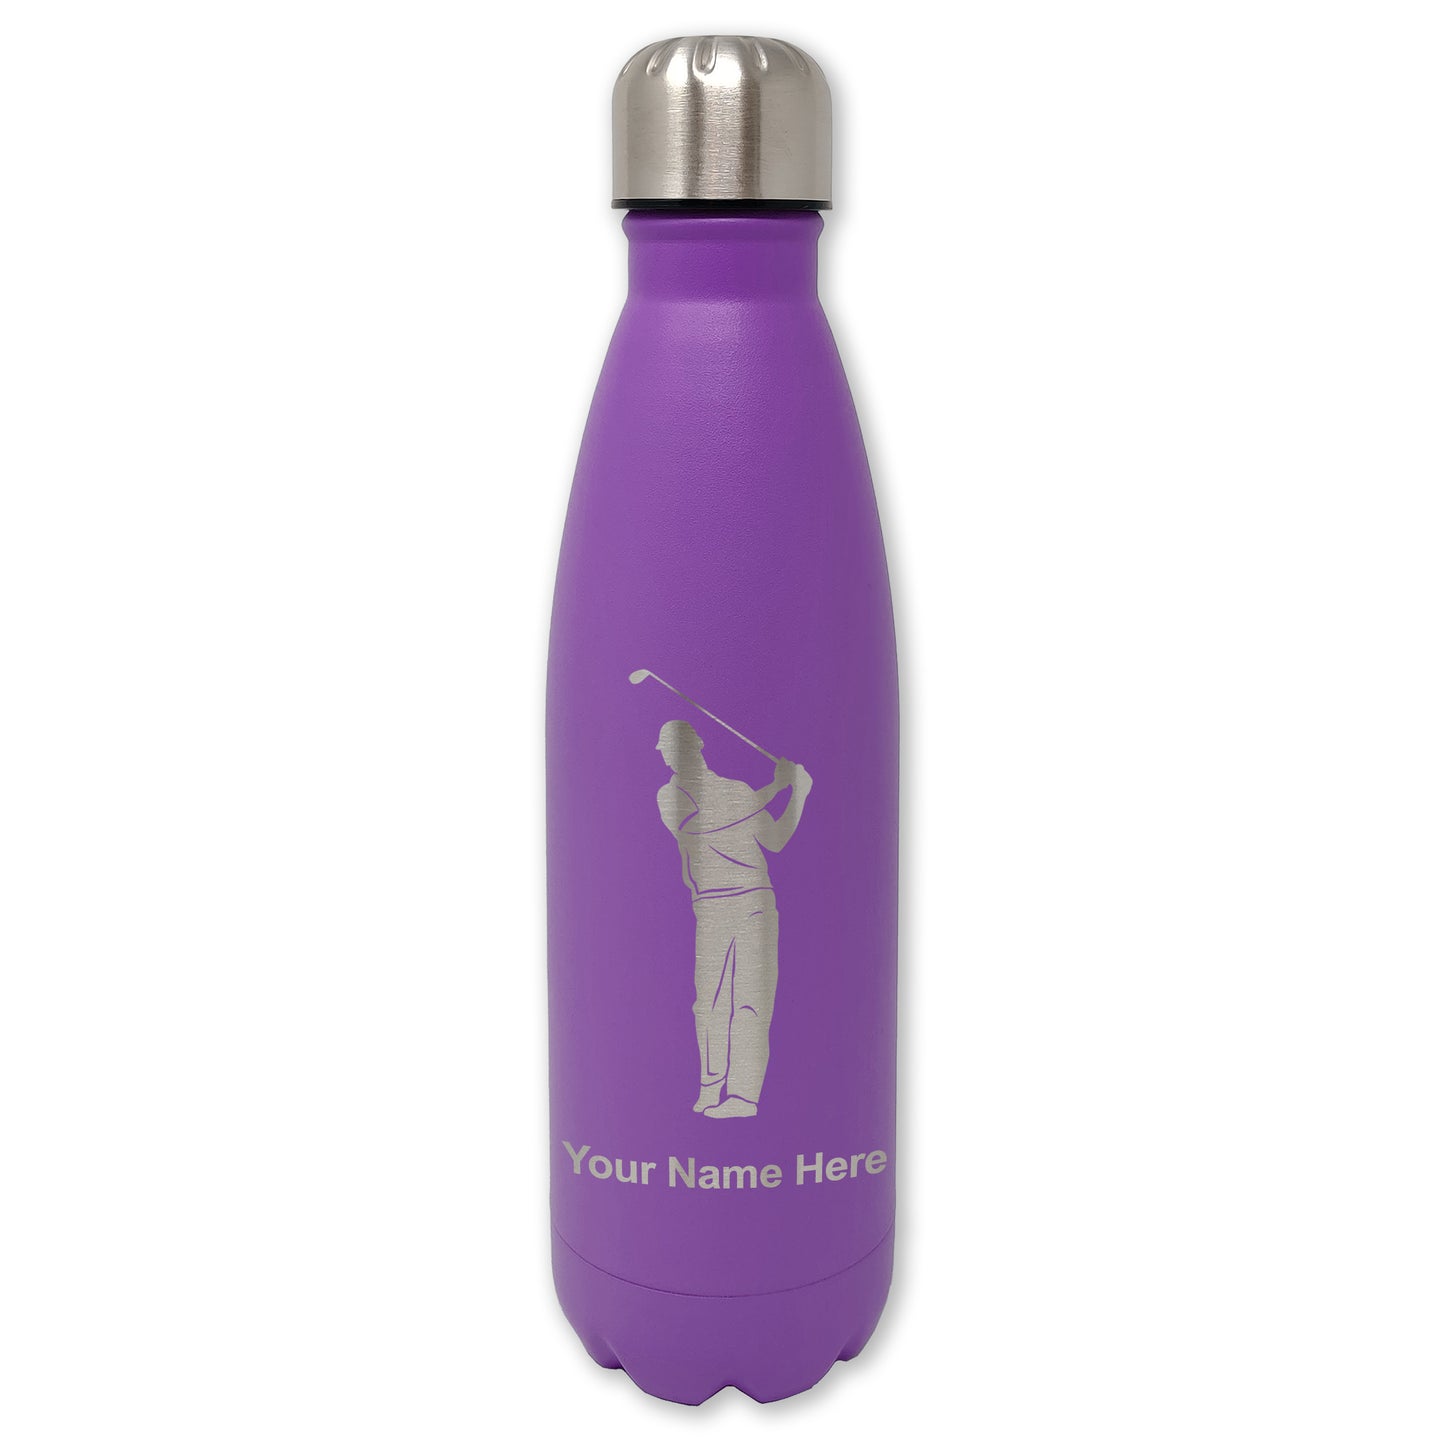 LaserGram Double Wall Water Bottle, Golfer, Personalized Engraving Included